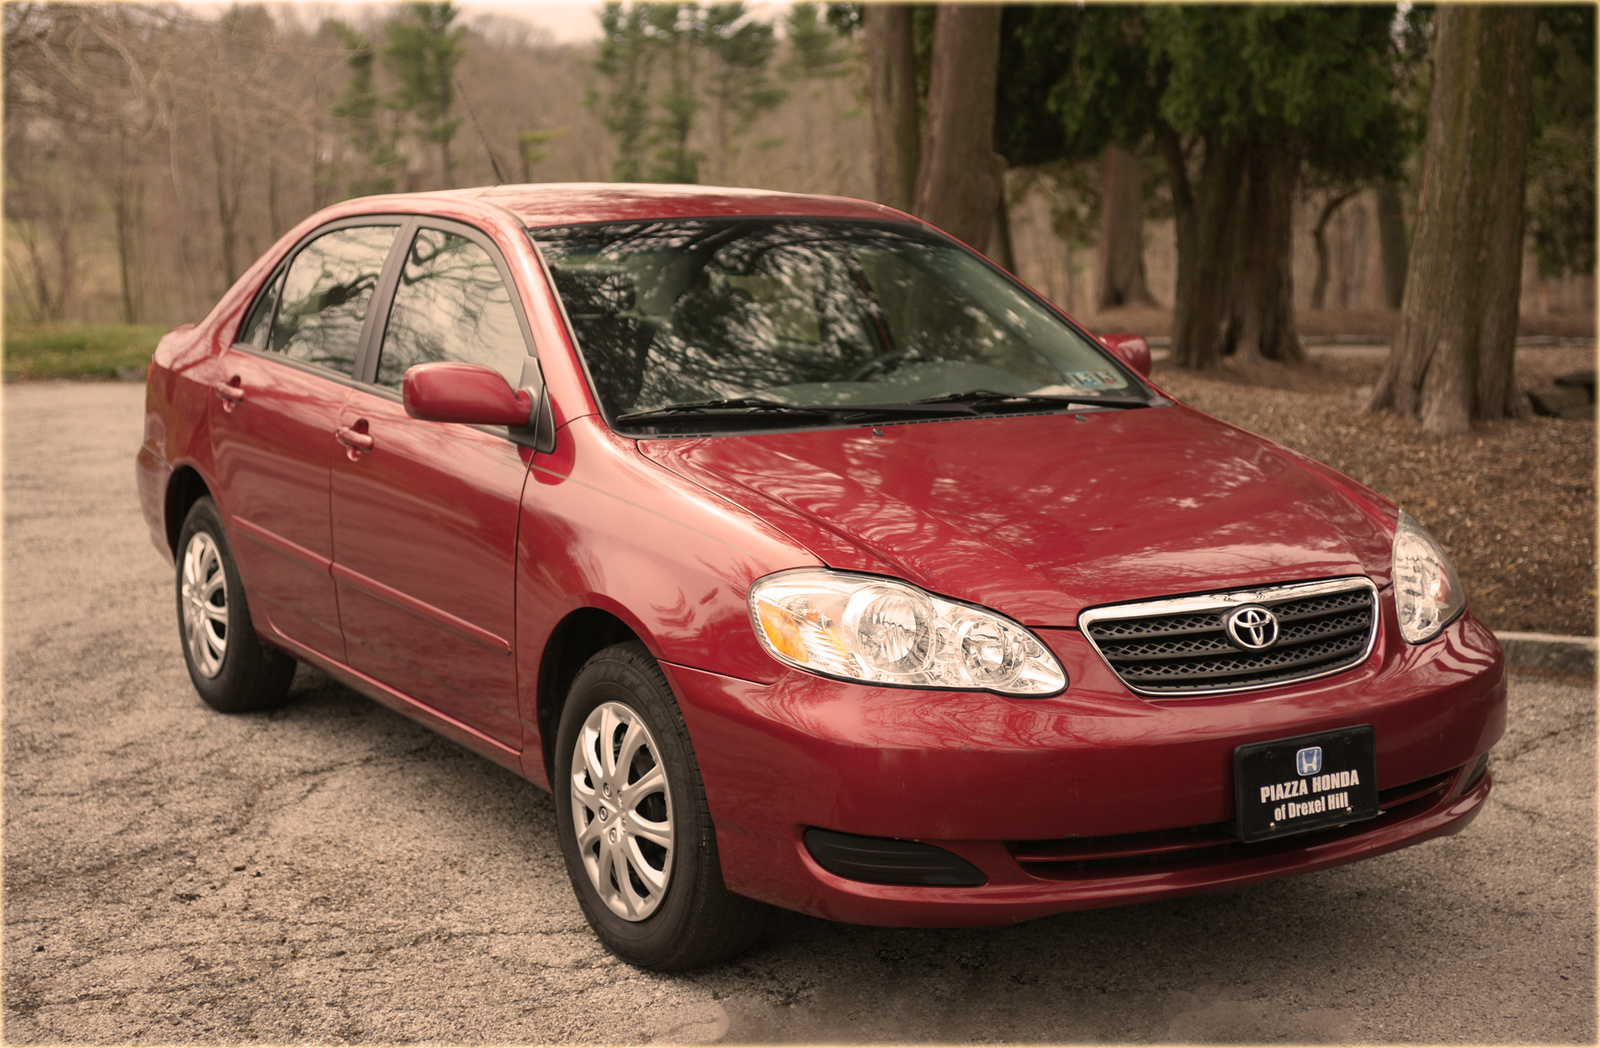 2008 Toyota Corolla: Prices, Reviews & Pictures - CarGurus